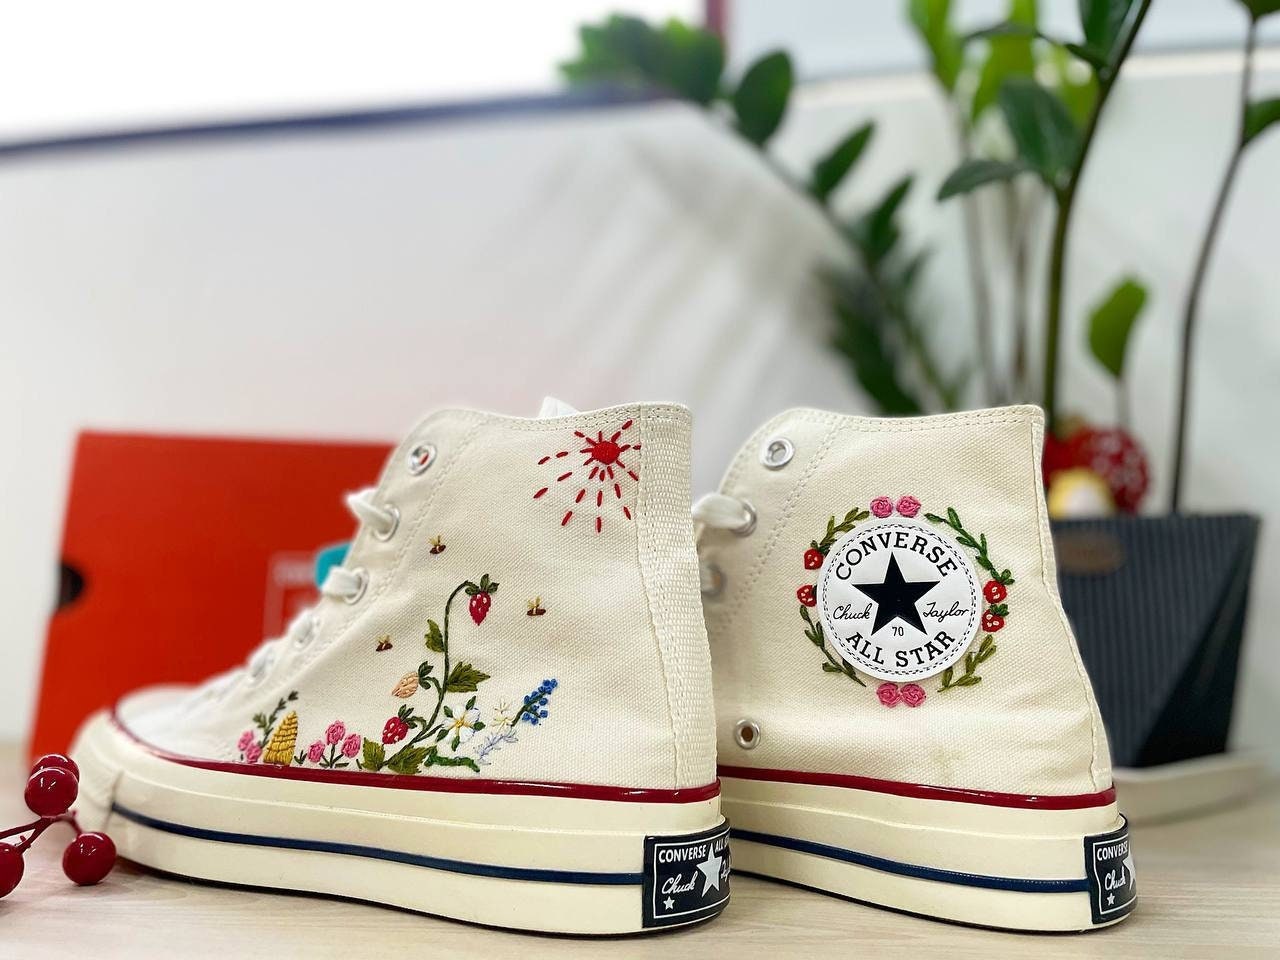 Melting tjene Maladroit Strawberry and Bees Embroidery Converse Hand Embroidery - Etsy